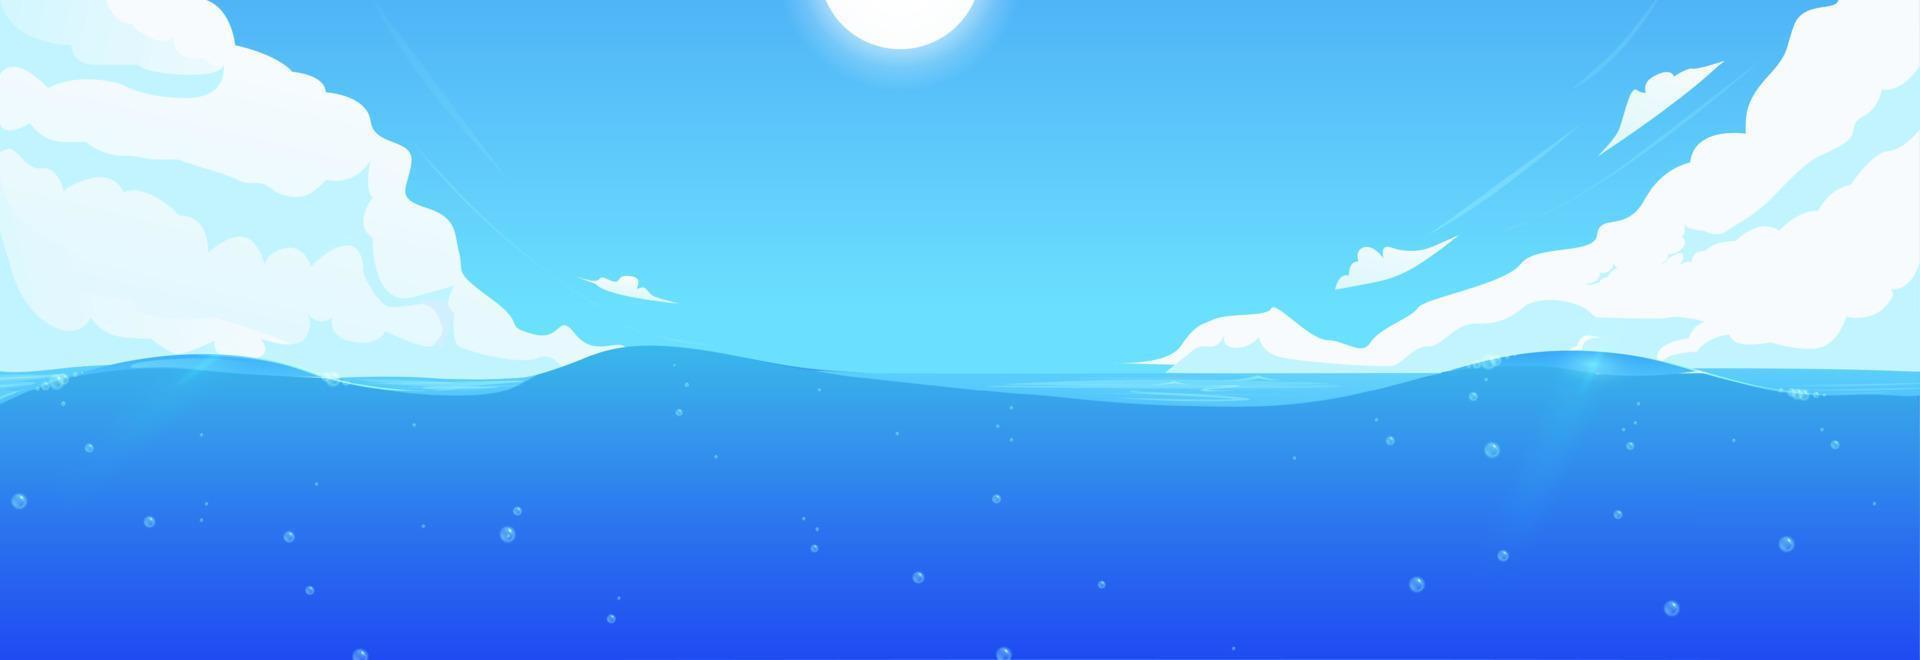 sea-landscape-for-game-background-design-cartoon-ocean-wave-illustration-blue-water-and-sky-with-clouds-vector  - Seacoast Repertory Theatre